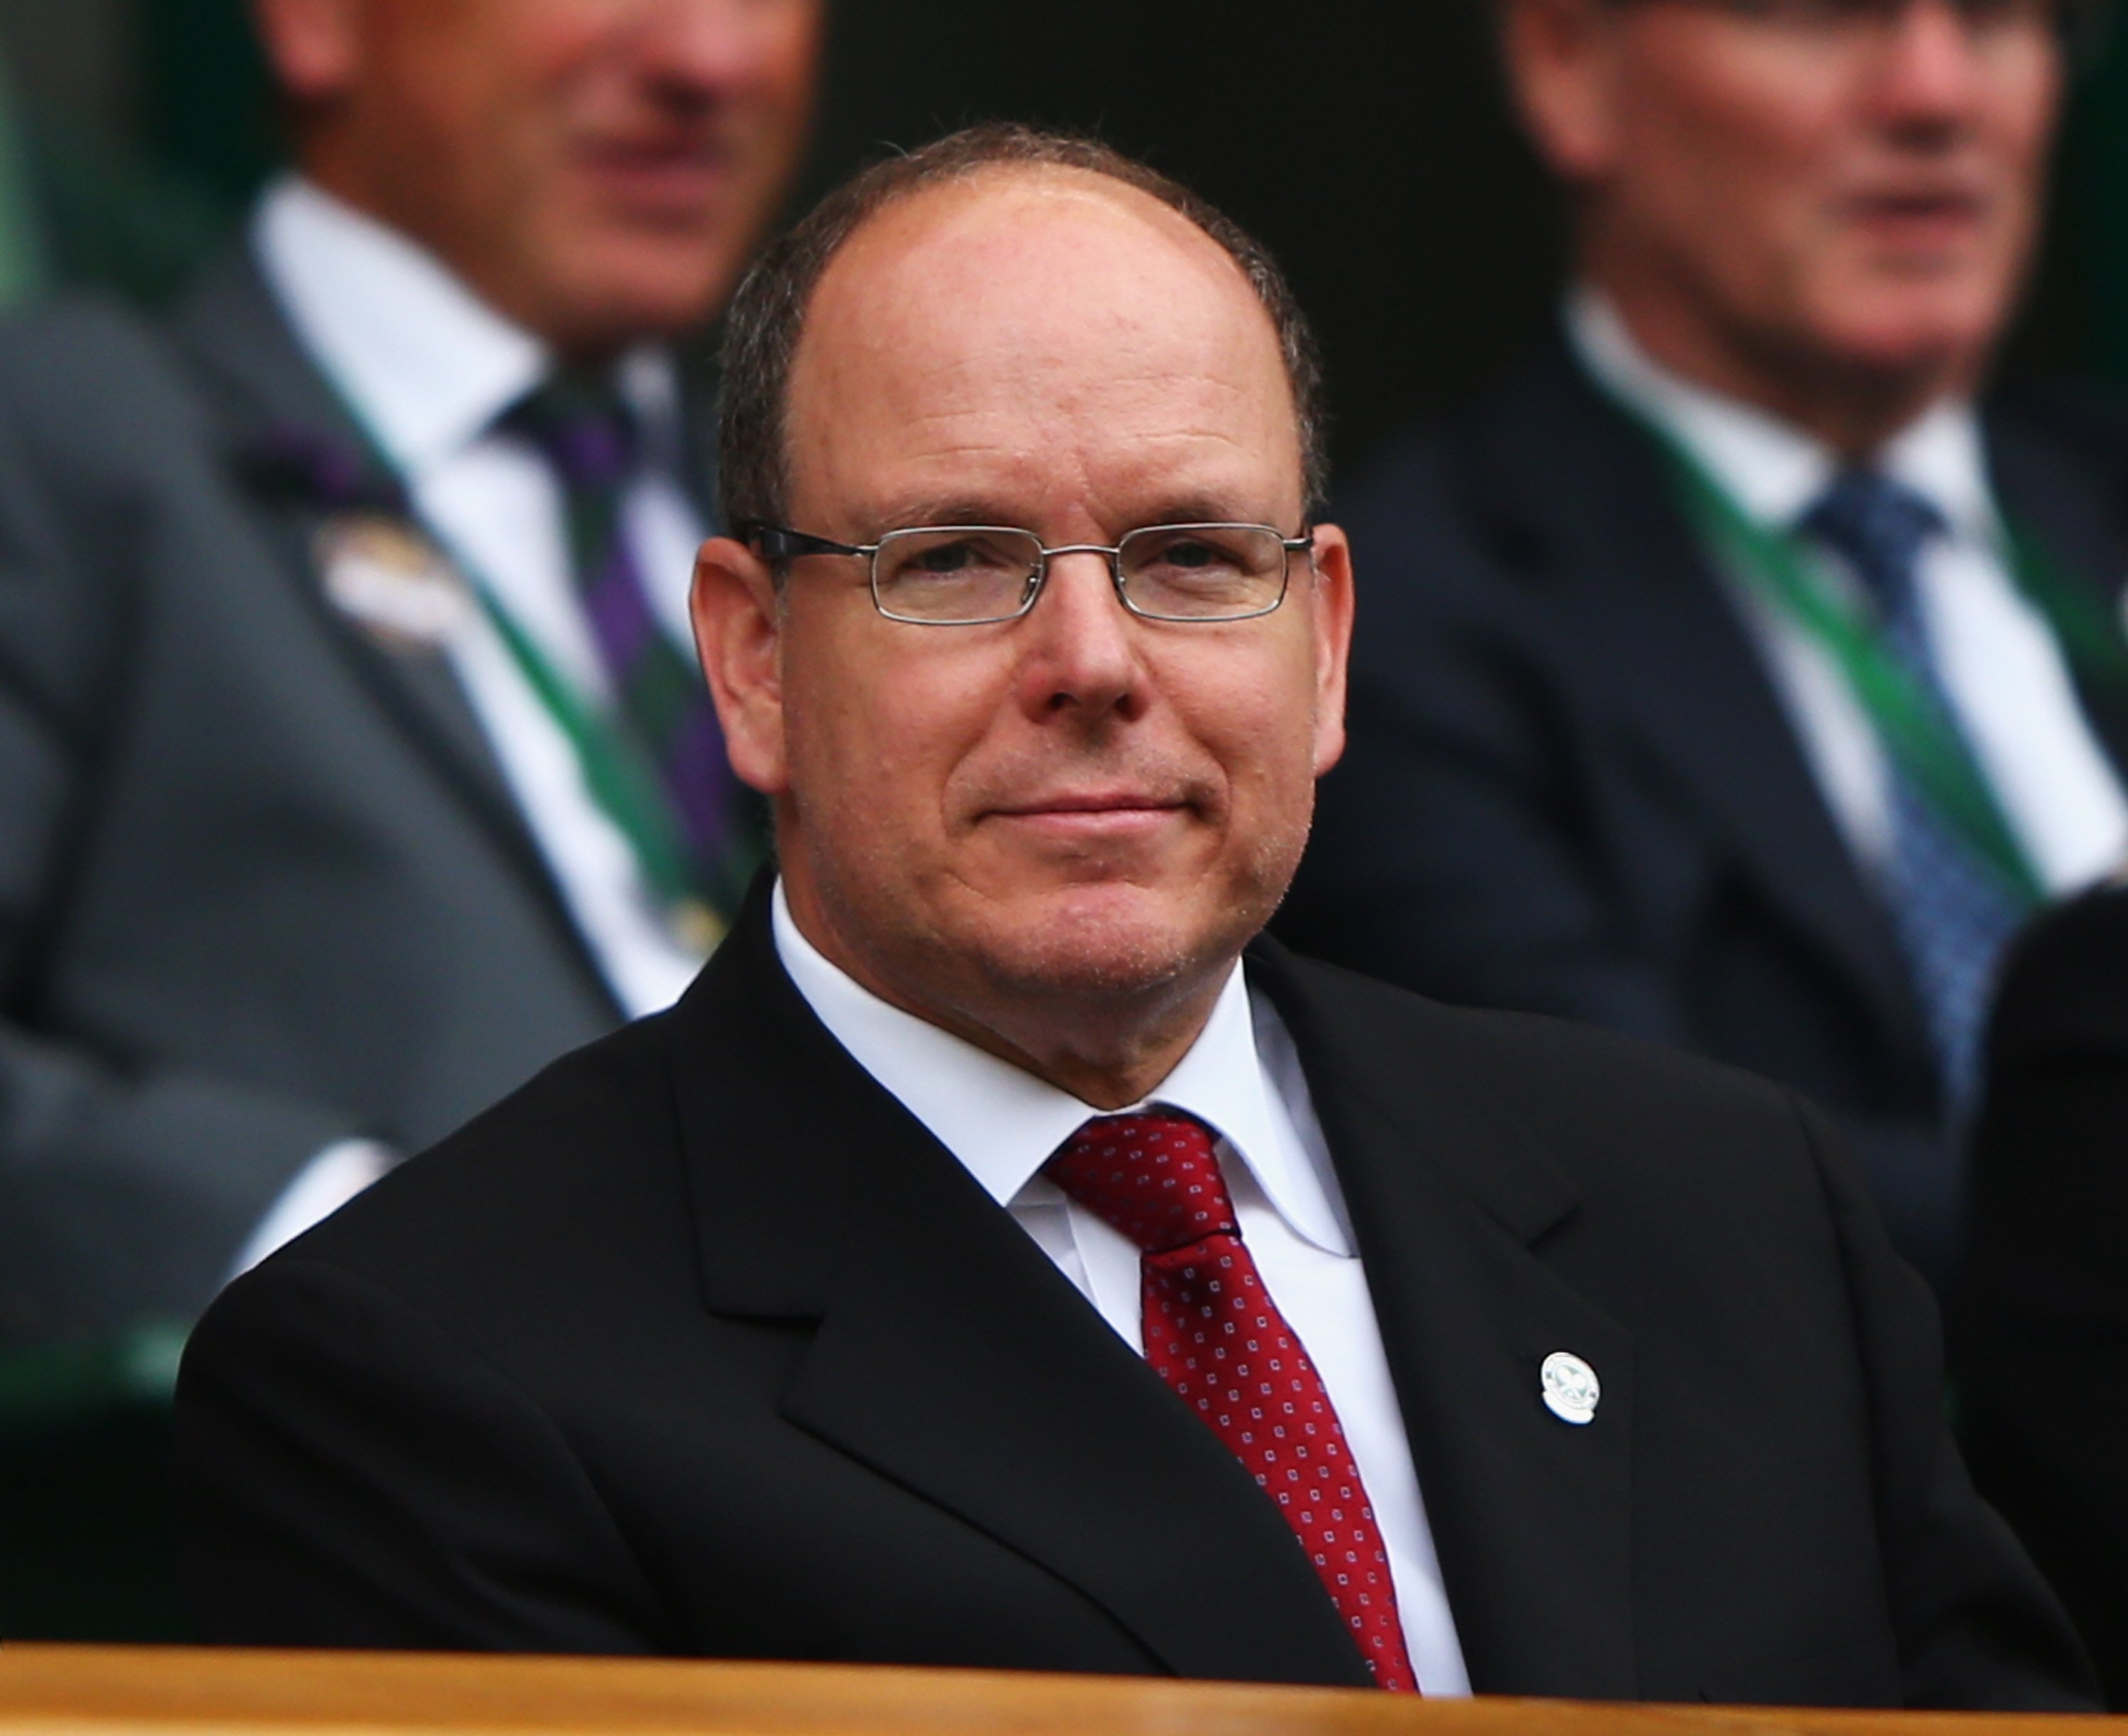 Prince Albert II of Monaco attends day nine of the Wimbledon Lawn Tennis Championships at the All England Lawn Tennis and Croquet Club on July 8, 2015 in London, England. | Source: Getty Images